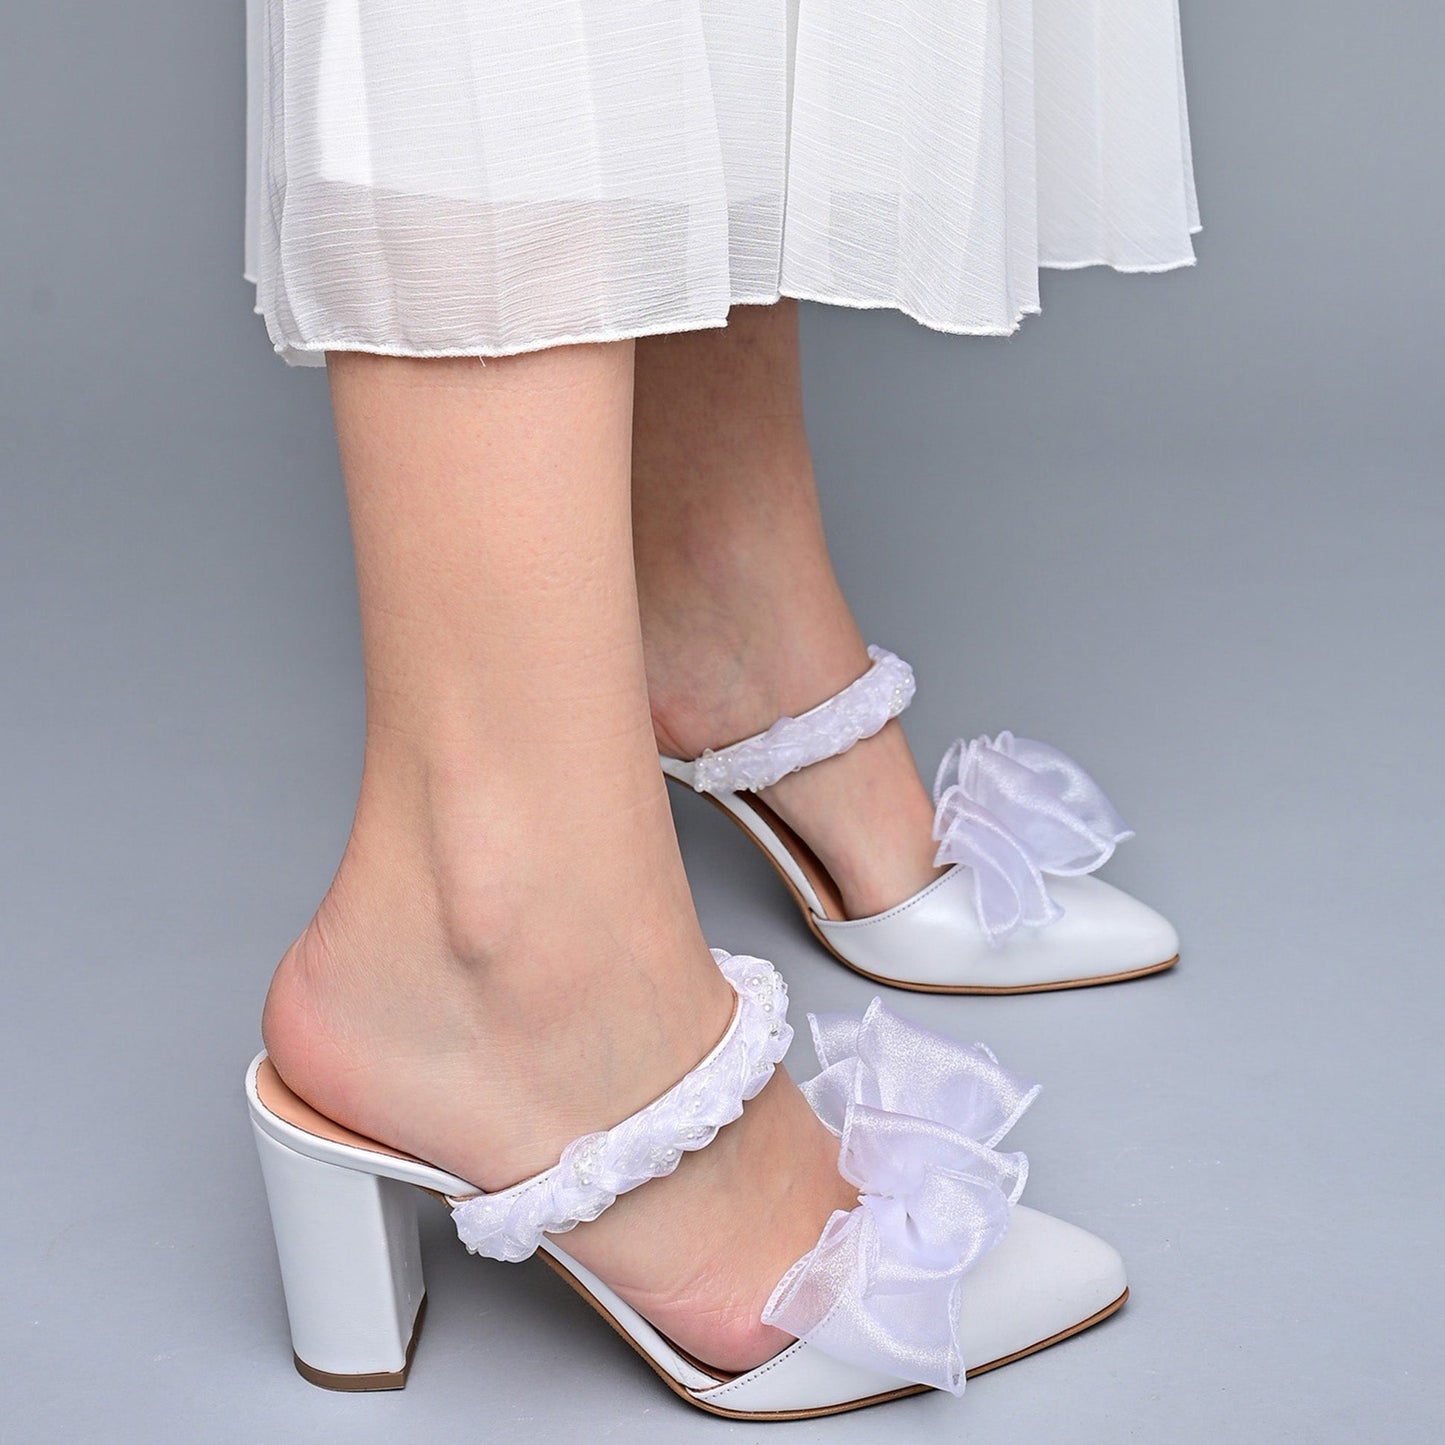 white shoes for wedding